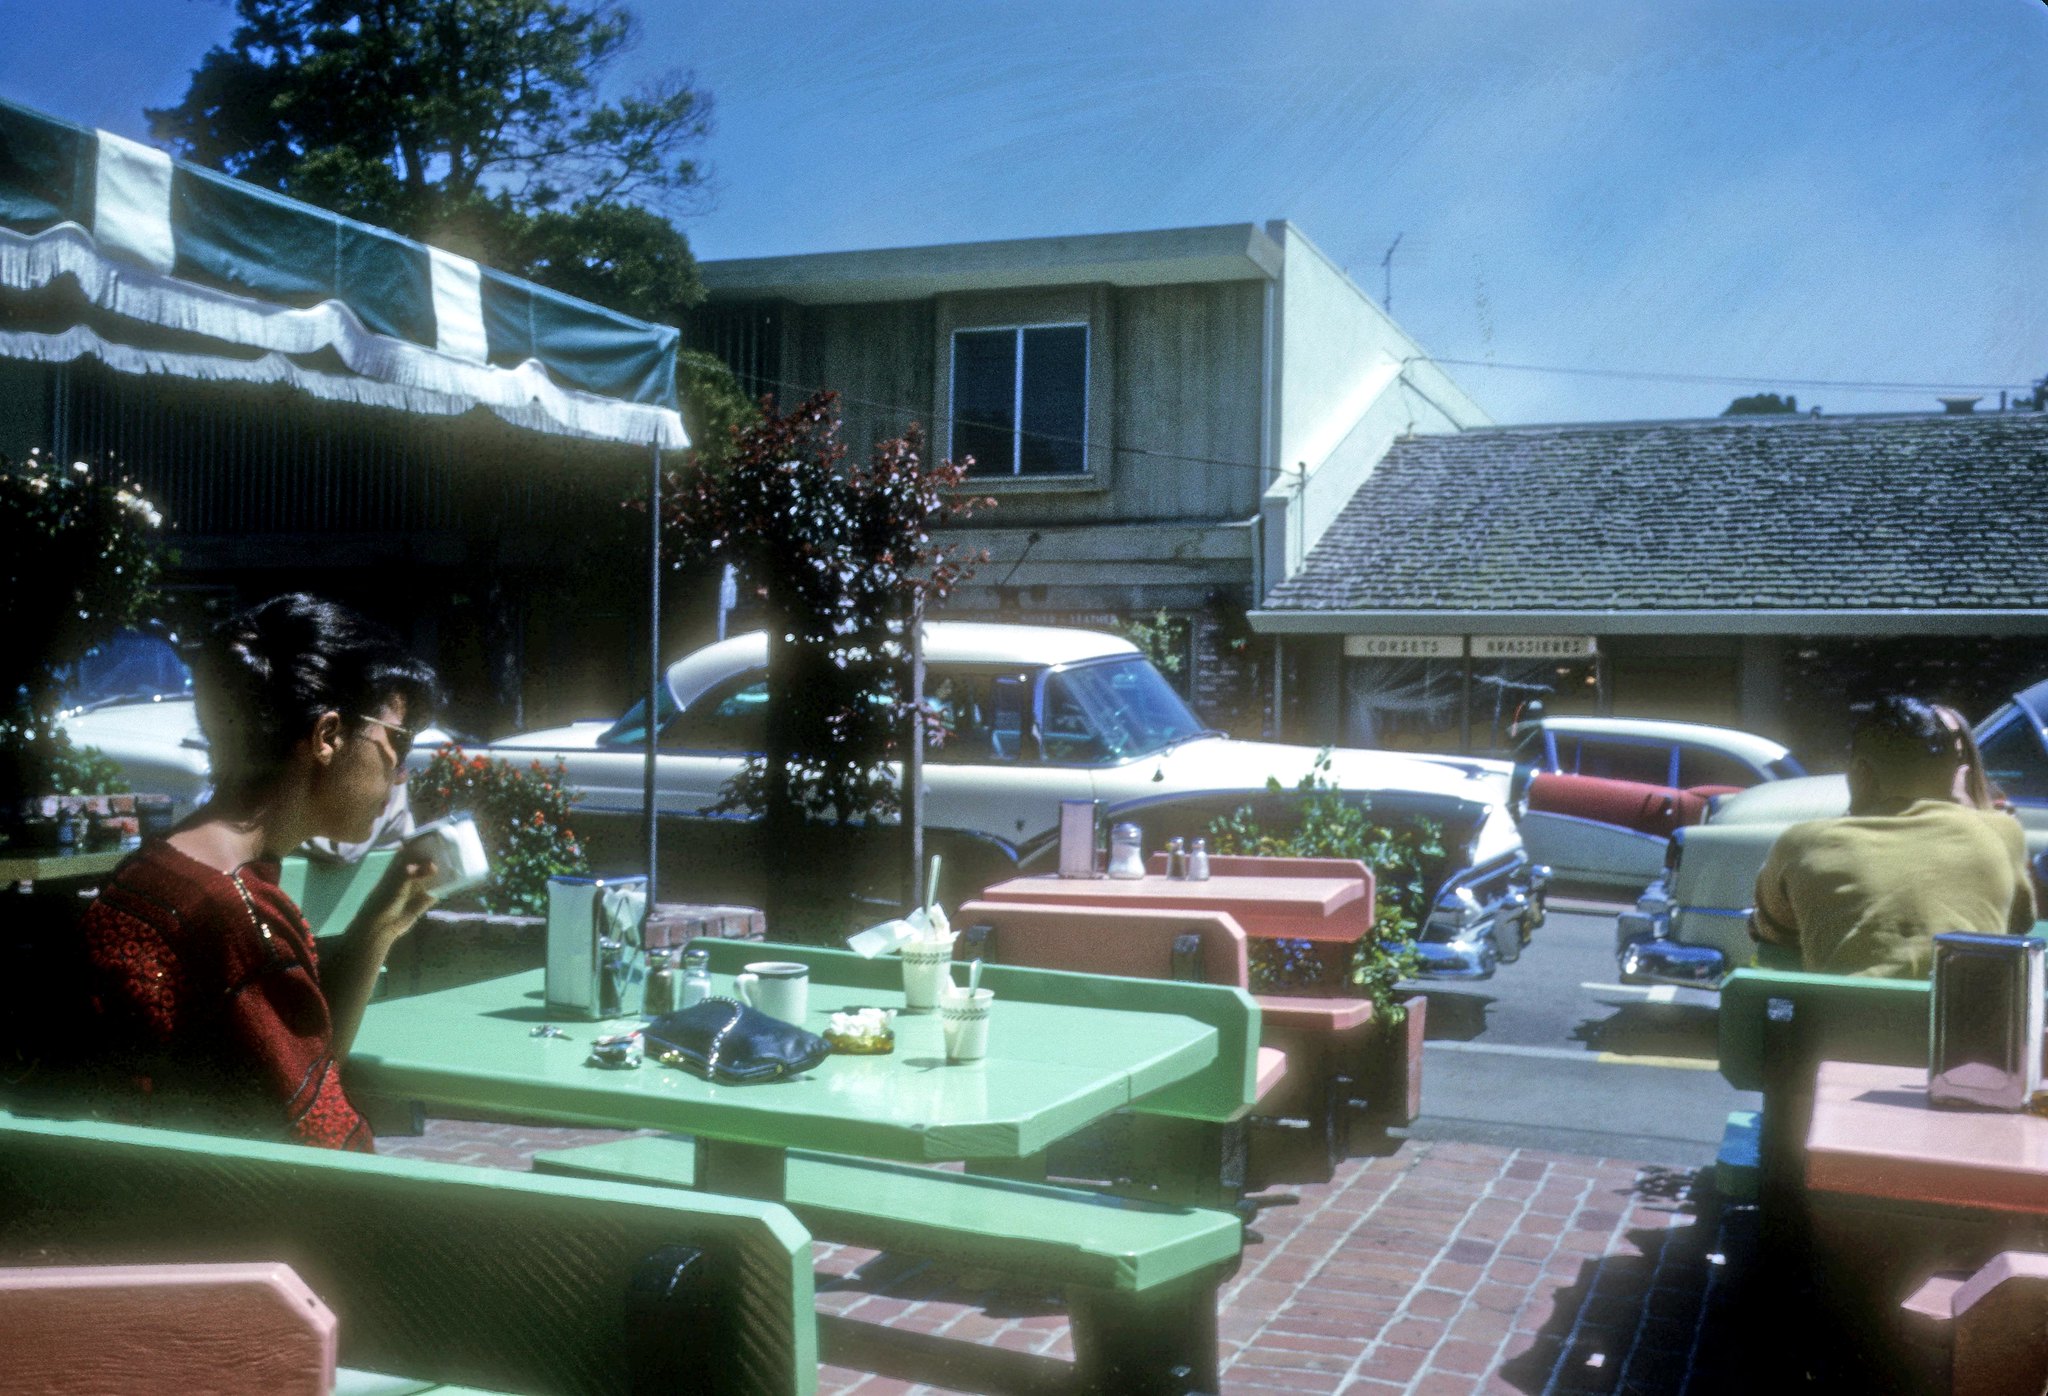 A sunny day at an outdoor cafe. c1962.jpg